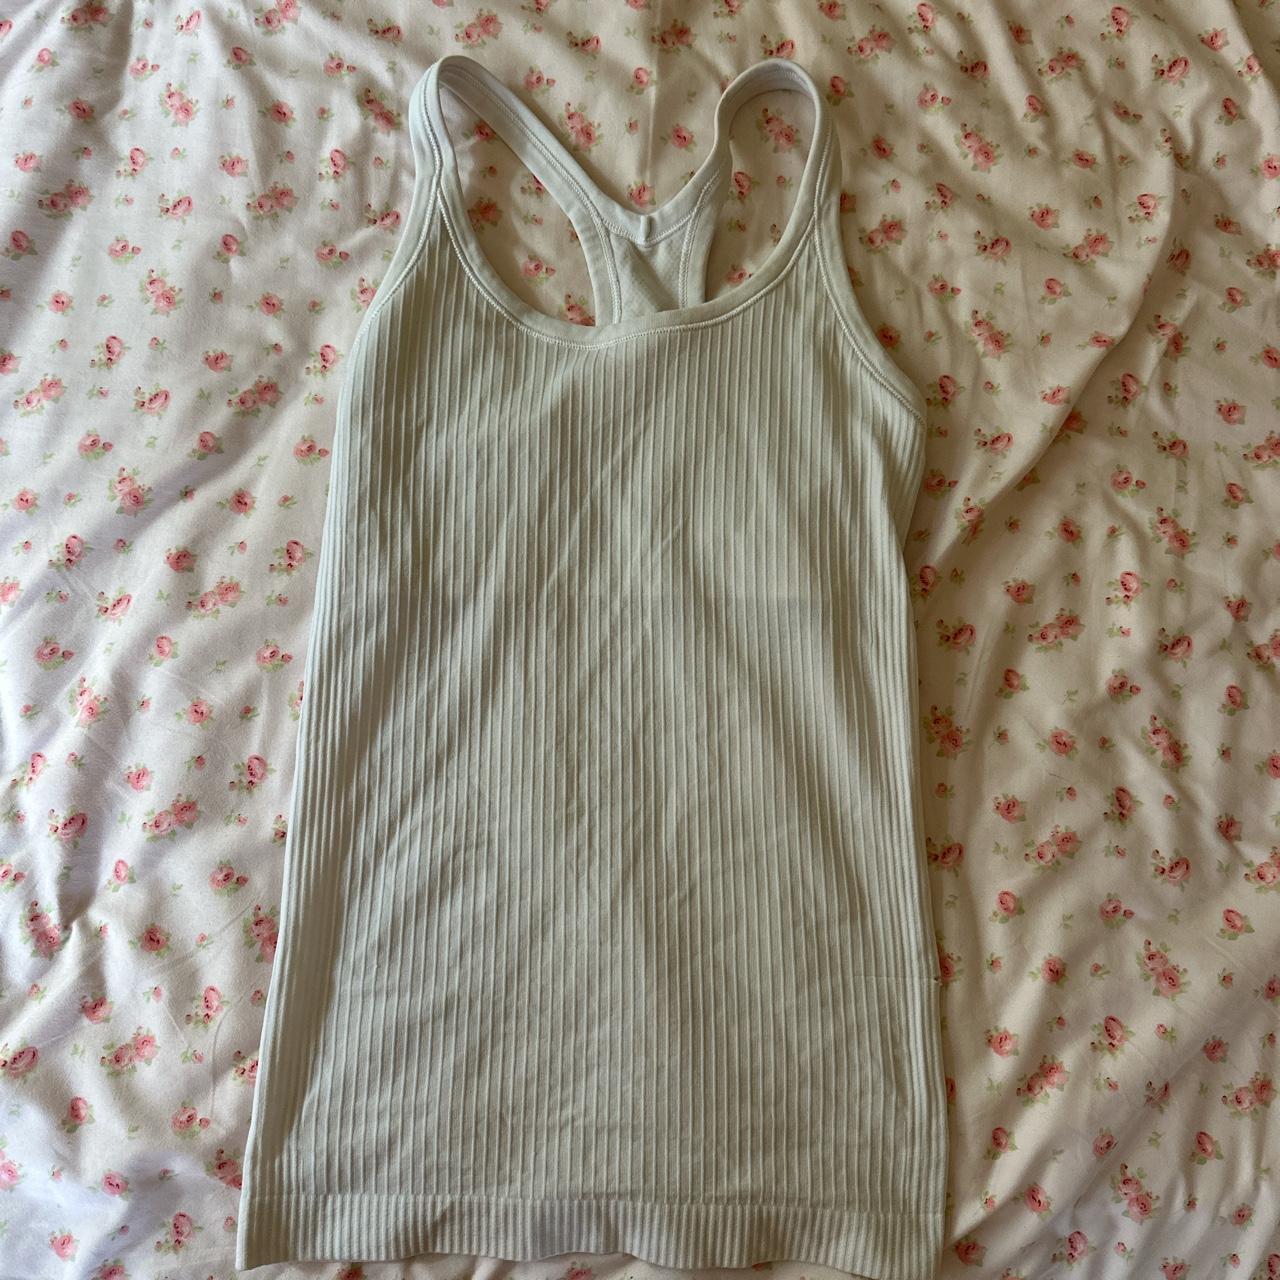 lululemon tank 🤍 (small hole in side but can get... - Depop